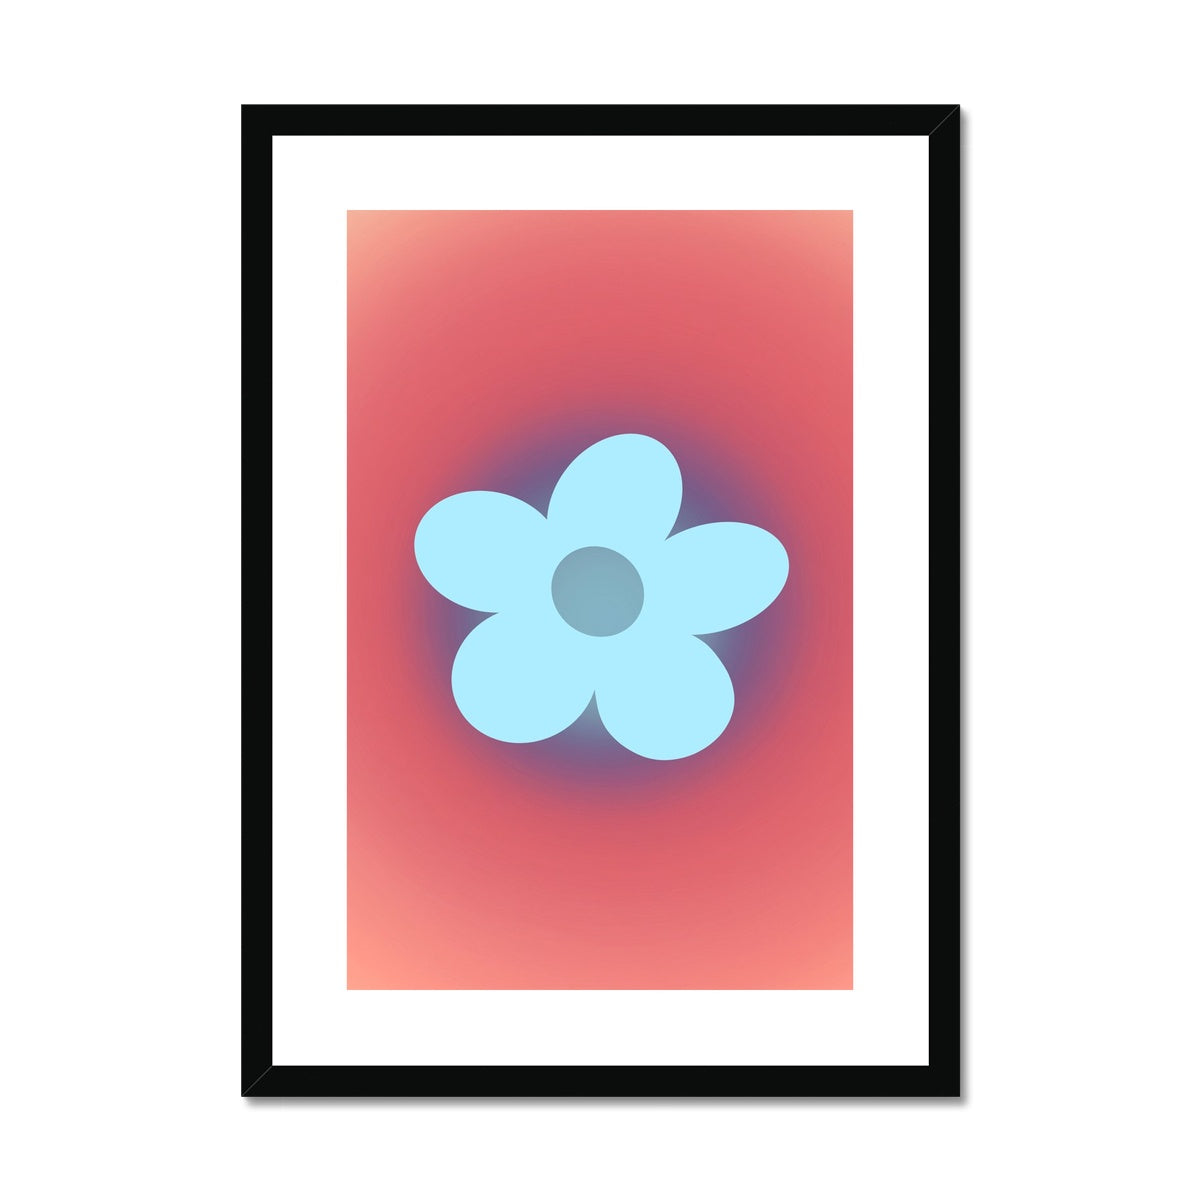 Danish pastel art prints full of daisy flowers and sunset gradient auras. Wall art with a flower market aesthetic. Trendy retro flower posters that are an aesthetic must have for dorm or apartment wall decor.